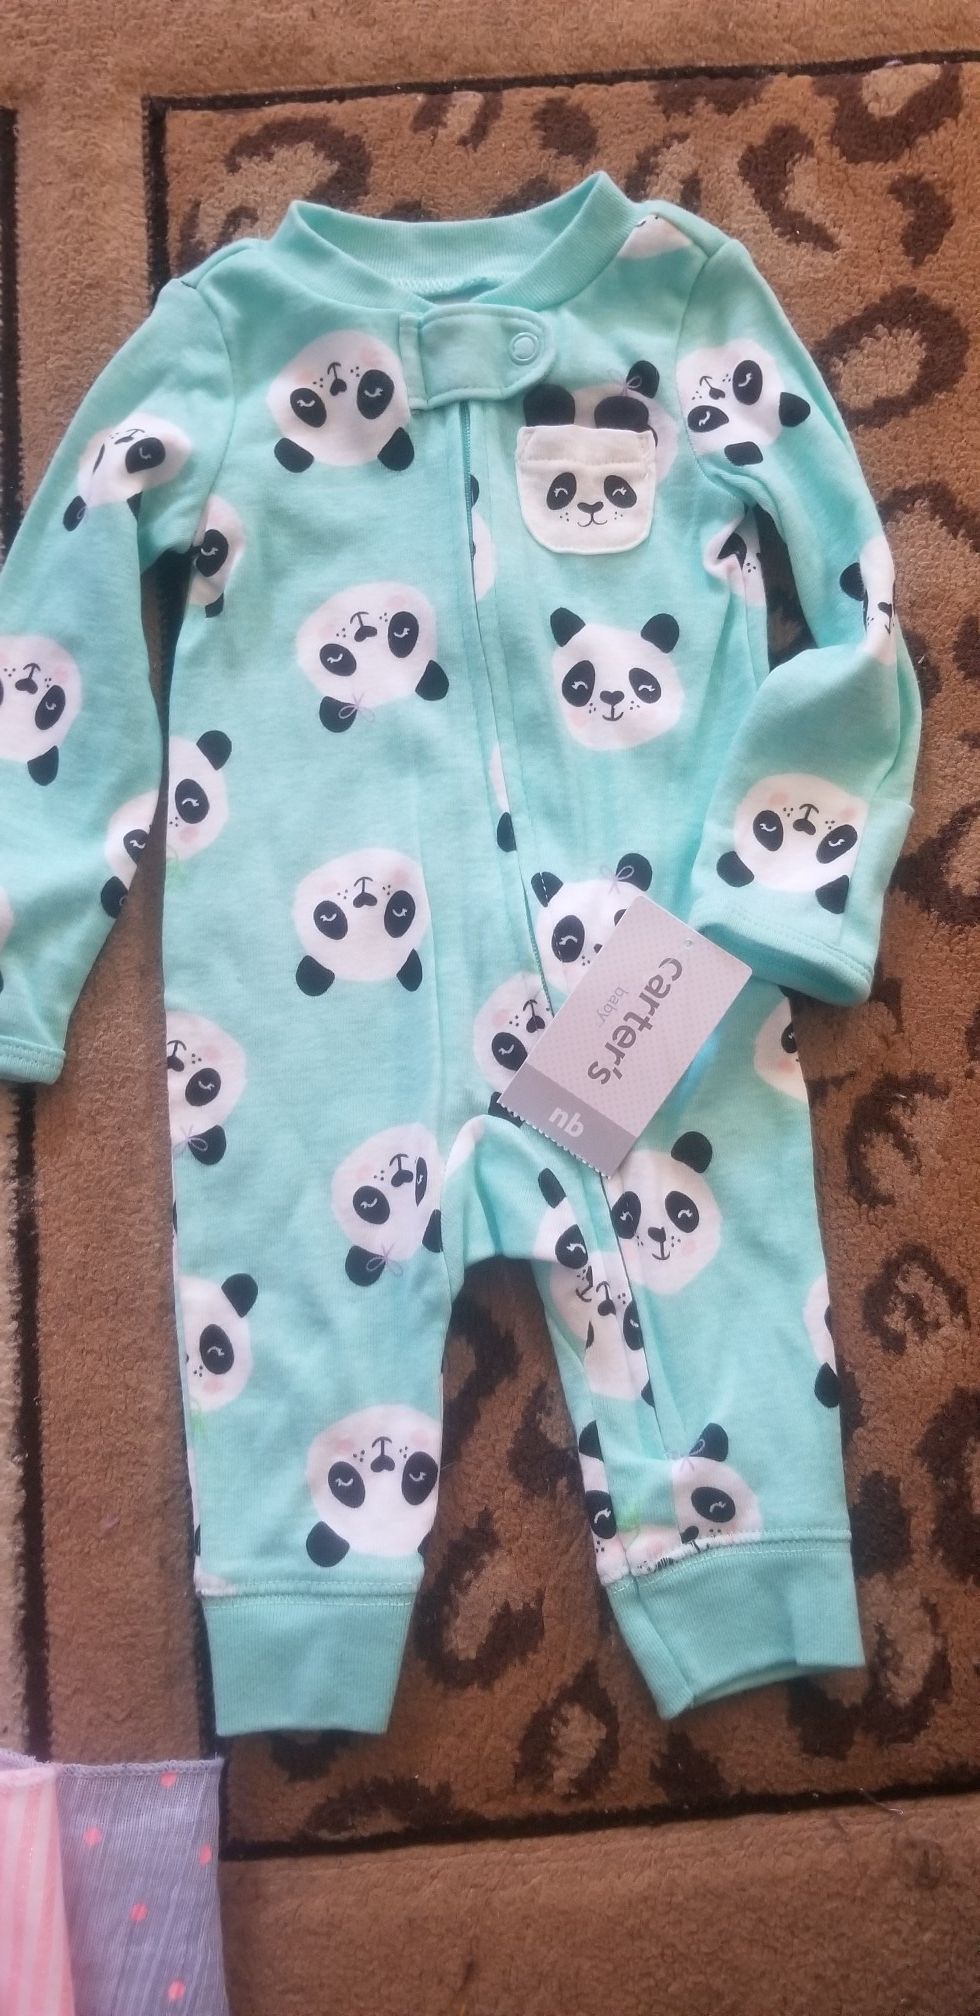 Baby clothes new